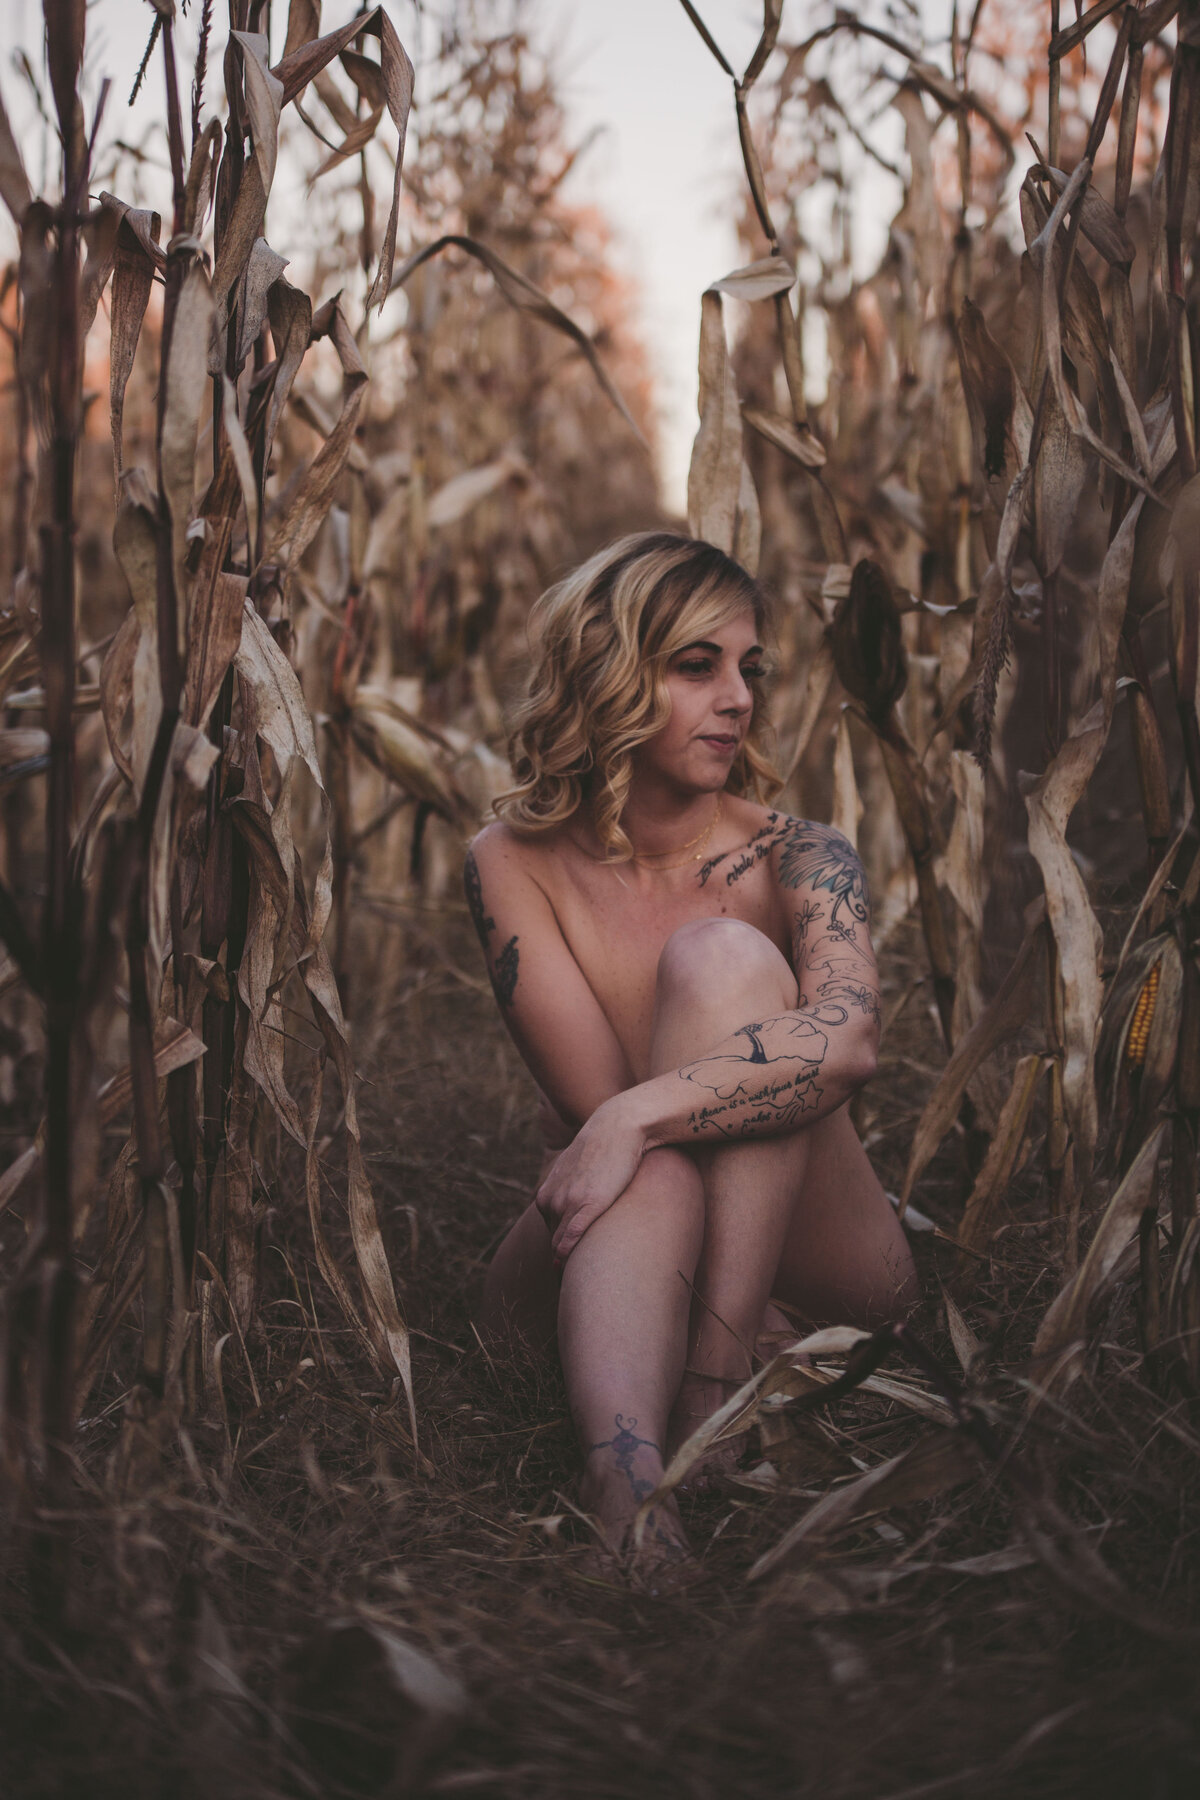 Cornfield intimate photos to show the nakedness of our heart